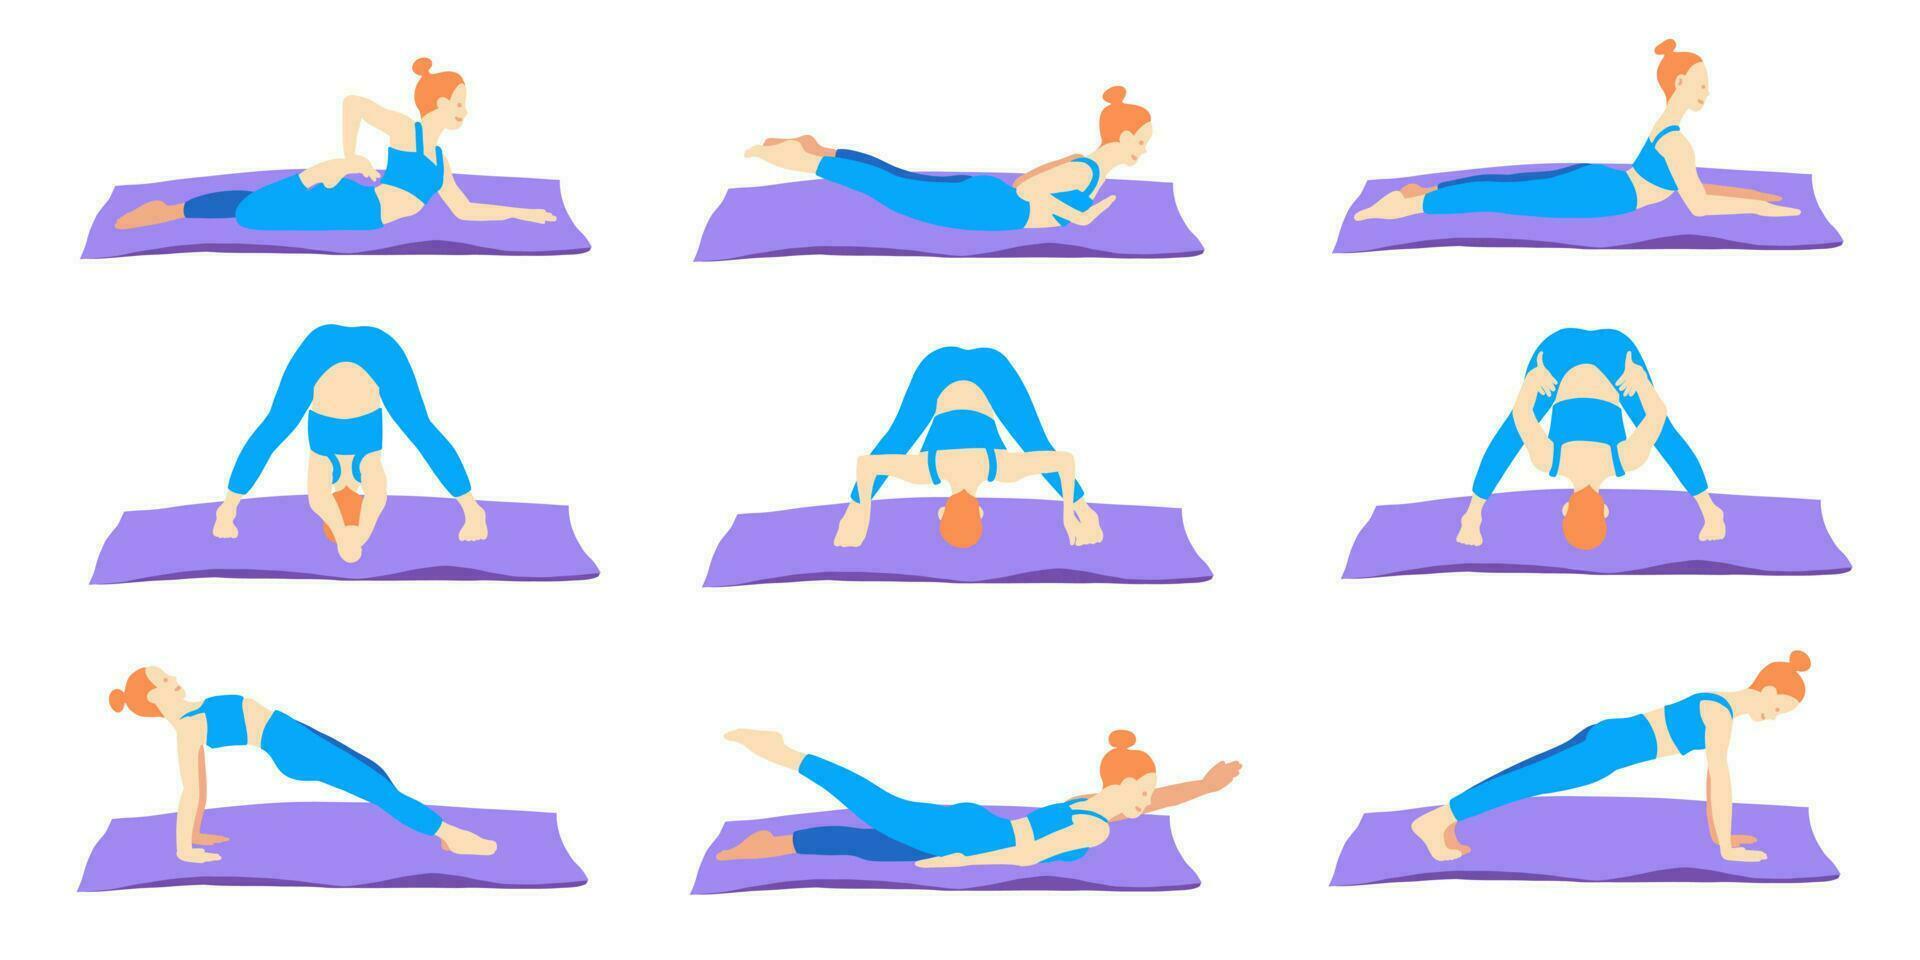 Flexibility yoga poses collection. Mats. Red hair female, lady, woman, girl. Meditation, pilates, mental health, training, gym. Vector illustration in cartoon flat style isolated on white background.